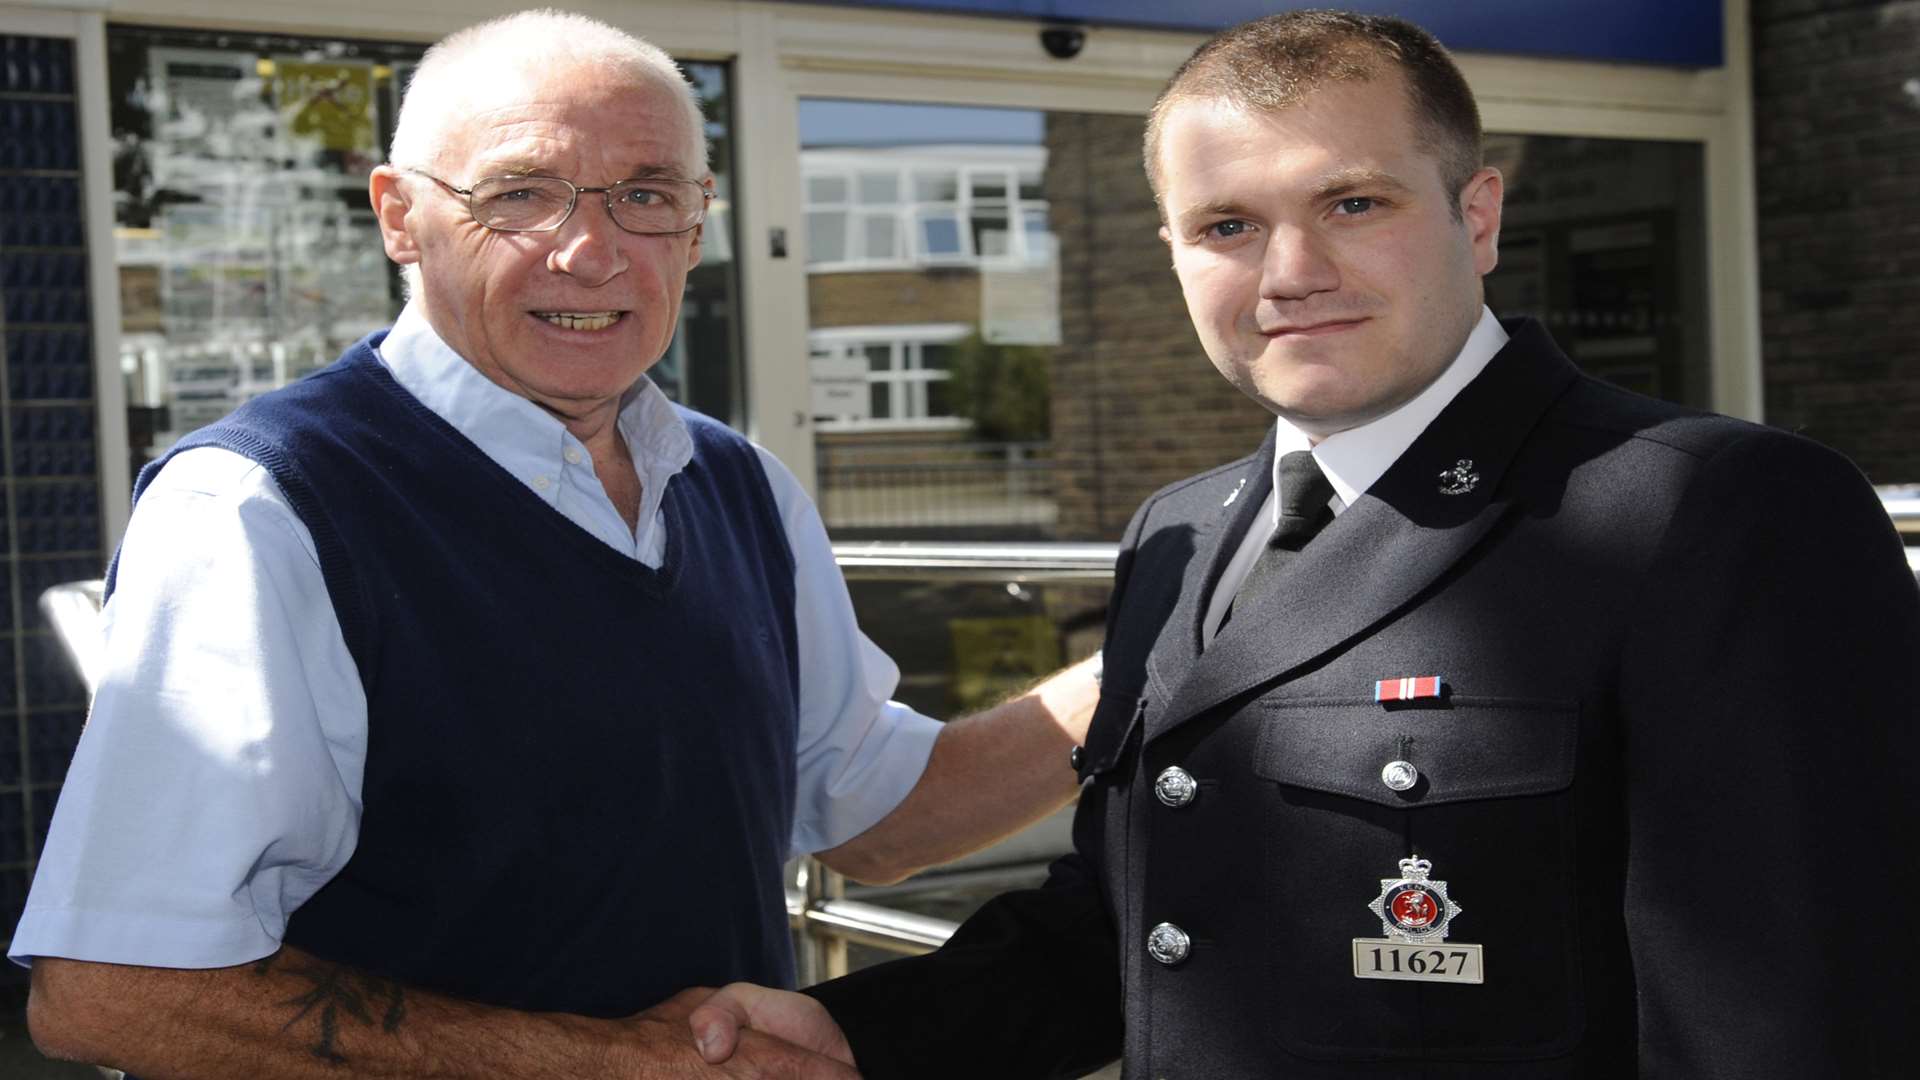 PC Ashley McMahan gave CPR to Stephen Fursse